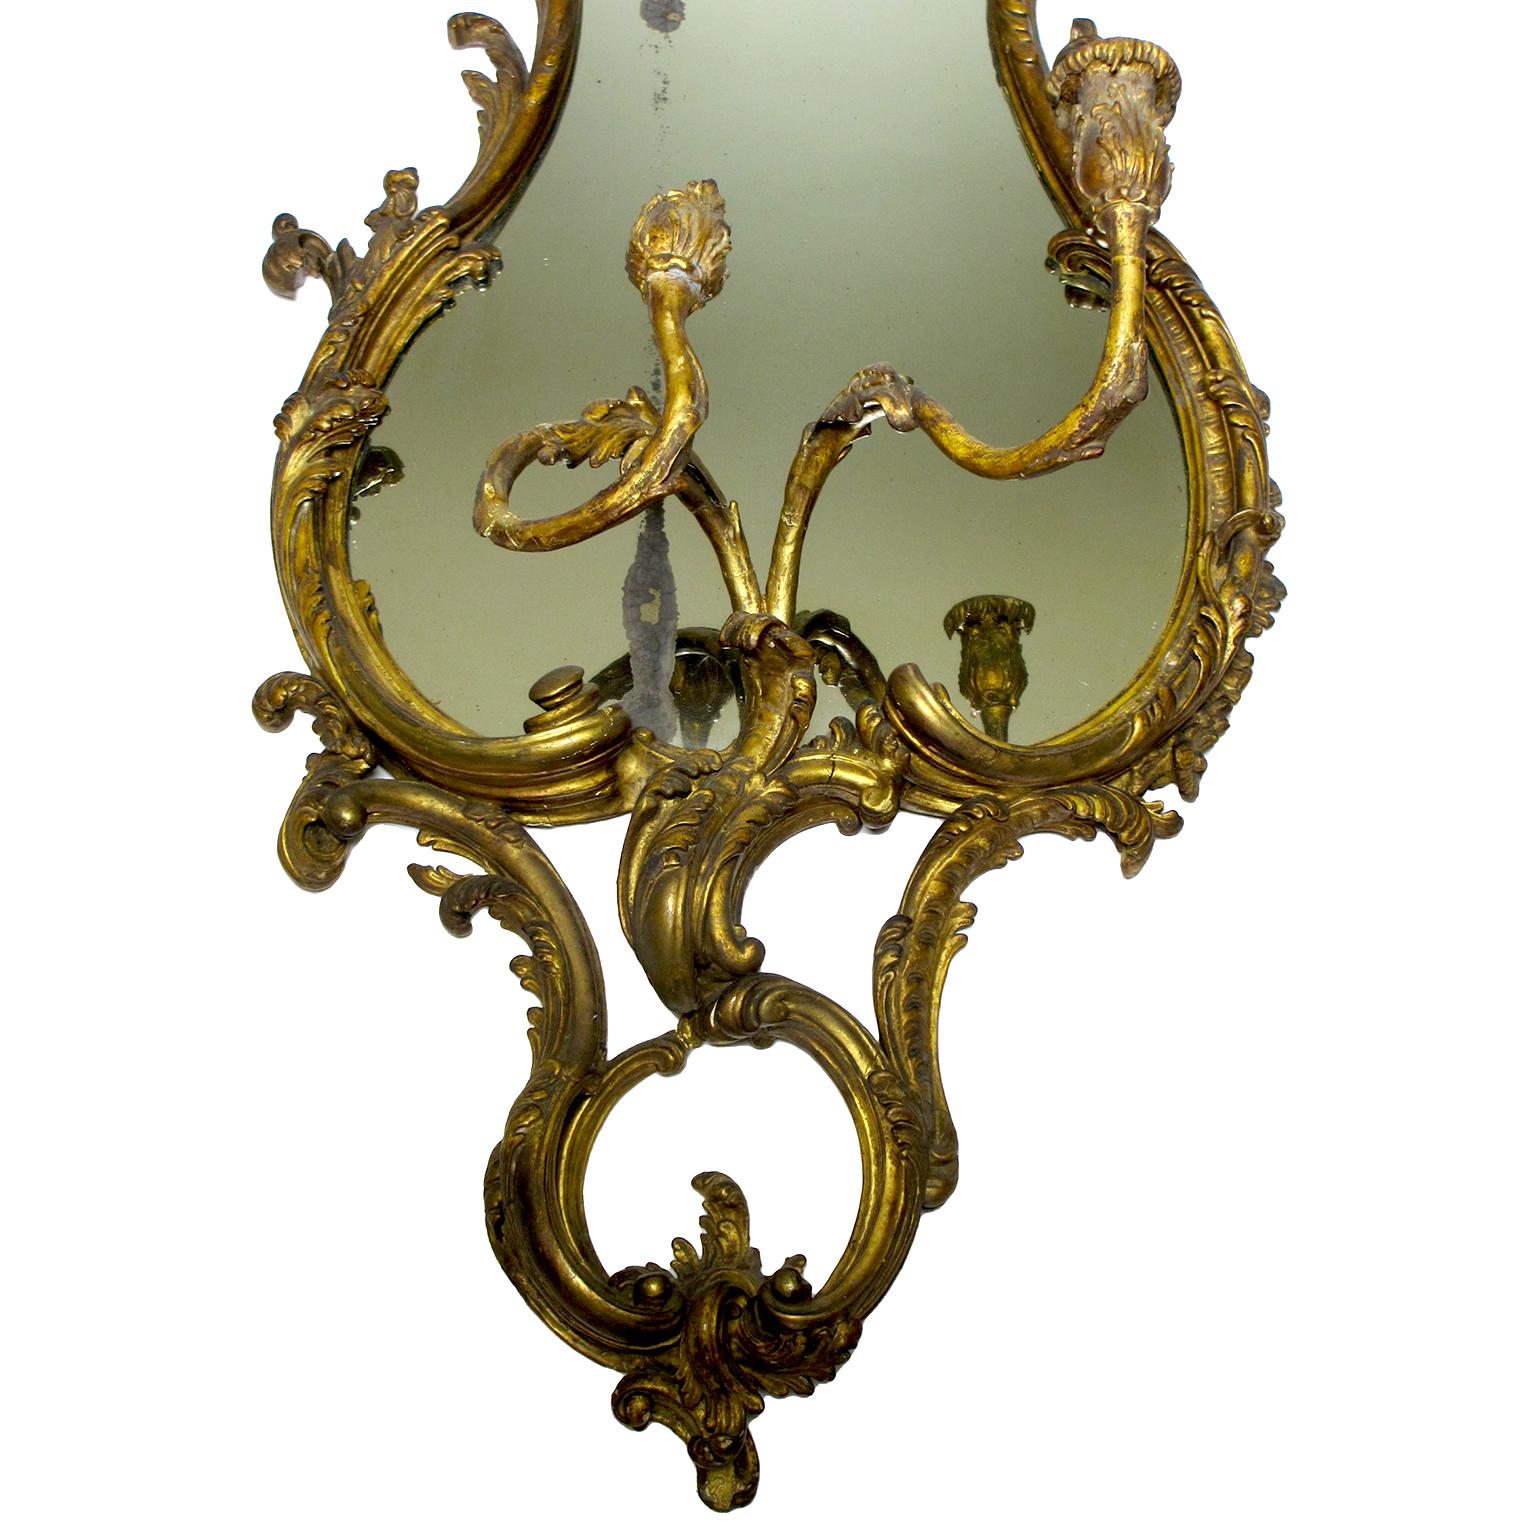 A Fine French 19th Century Louis XVI Style giltwood and gesso carved sconce mirror (Wall-Light) girandole with candelabra. The scrolled carved mirror frame surmounted with a pair of scrolled candle-holder candelabra. Circa: Paris, 1880.

Height: